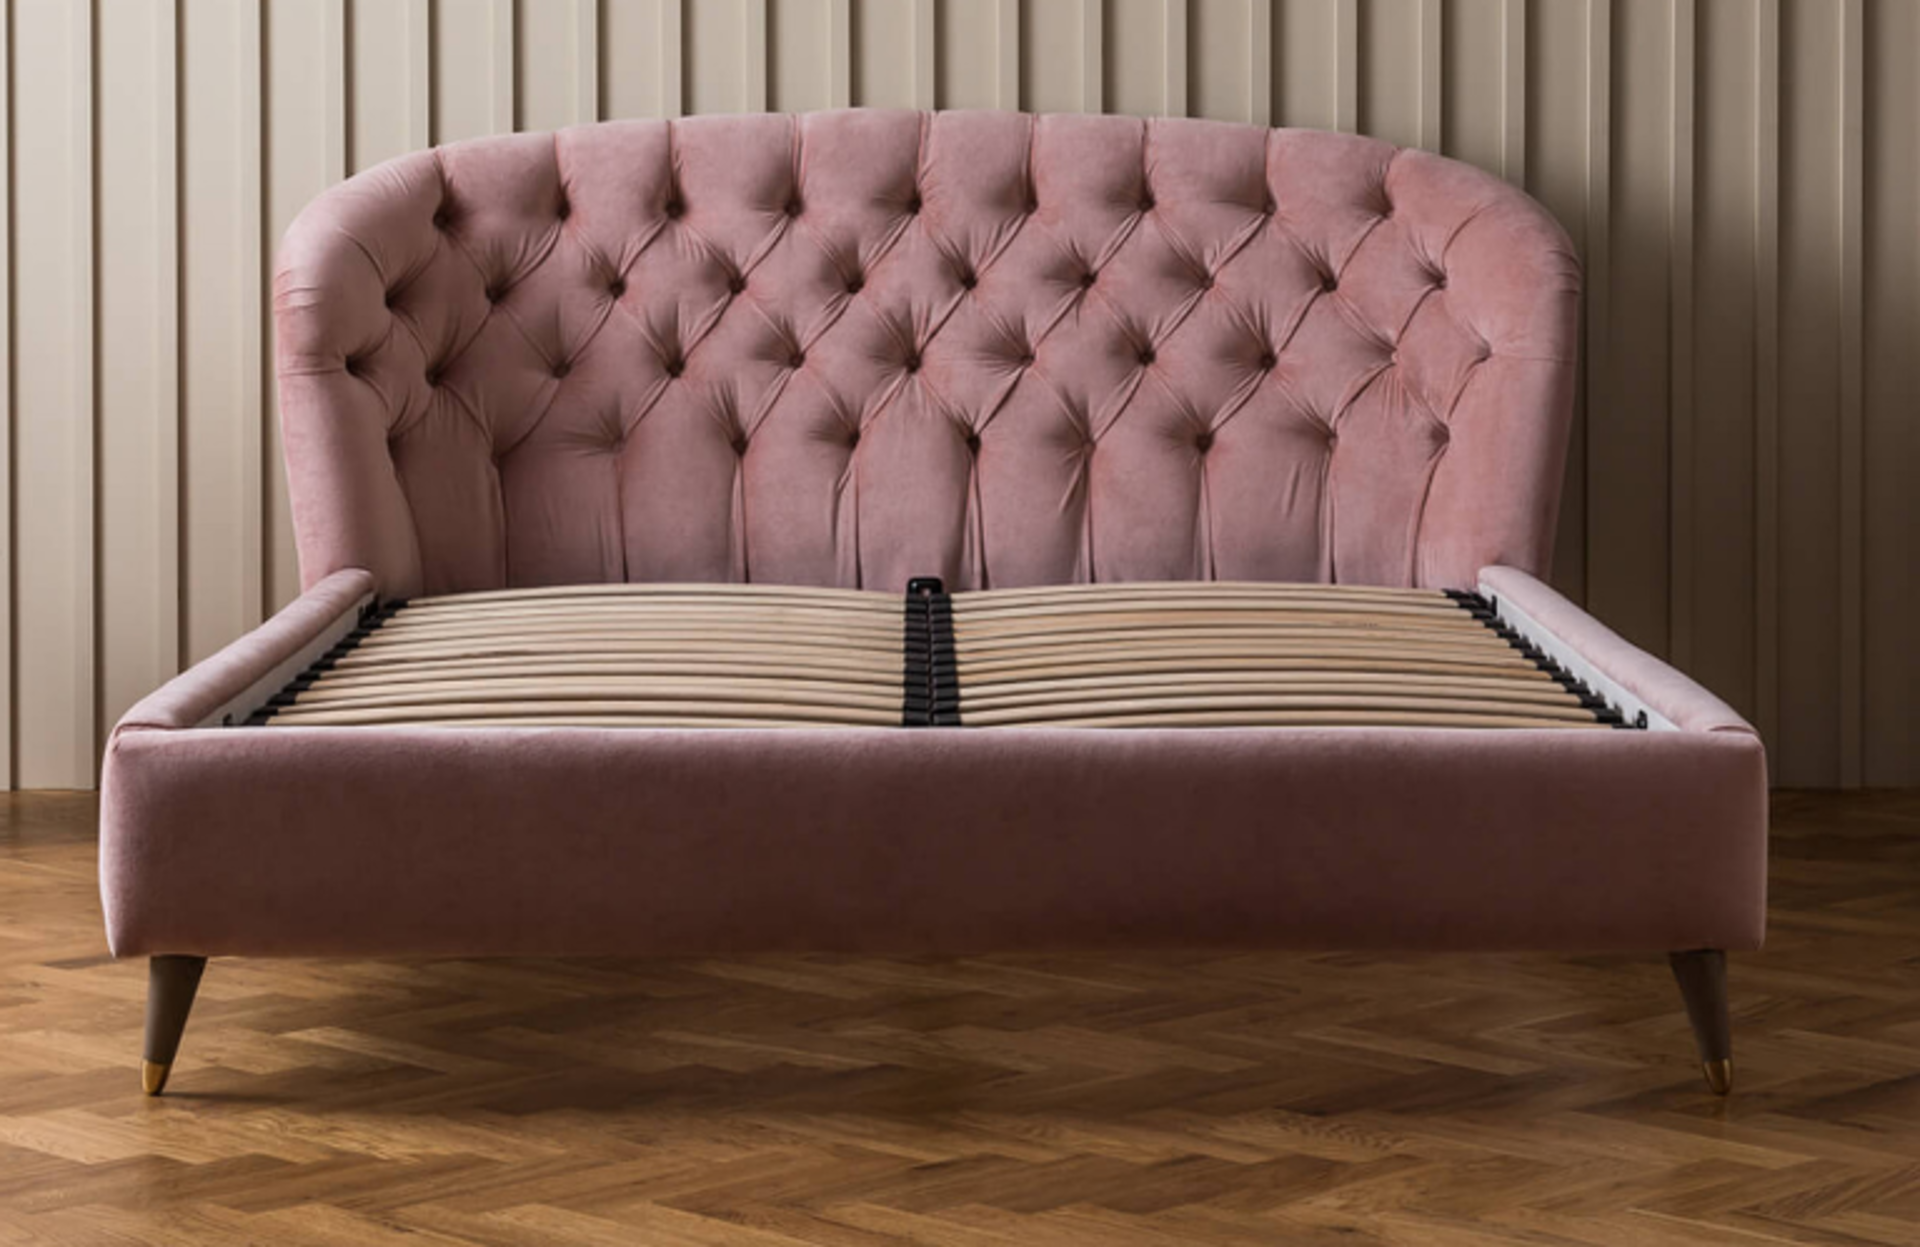 "Brook and Wilde The Duchess Bed Frame Superking Blush Pink RRP ?2399.00 he Duchess Bed Frame exudes - Image 5 of 5